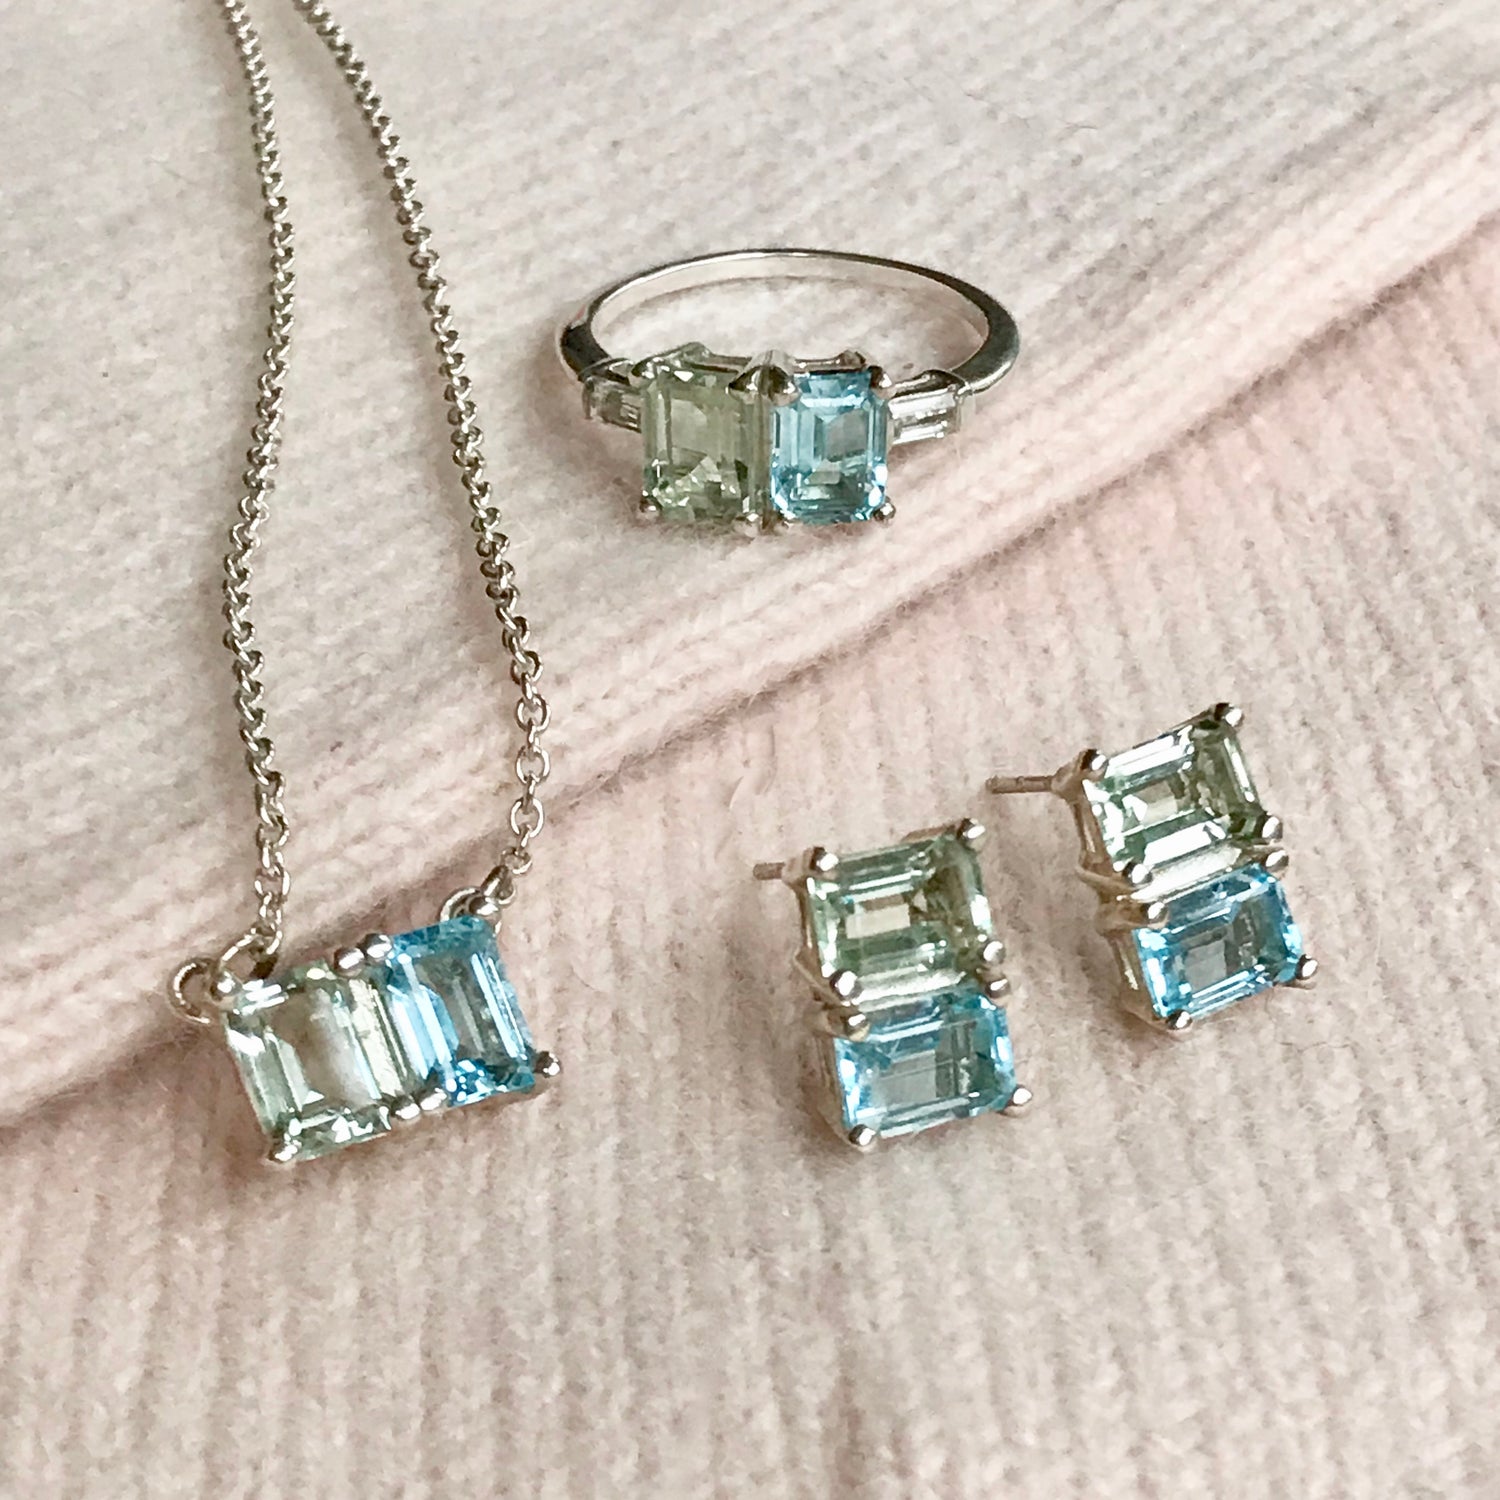 Lexington Earrings Ring and Necklace in Sky Blue Topaz and Mint Quartz Hannah Daye & Co